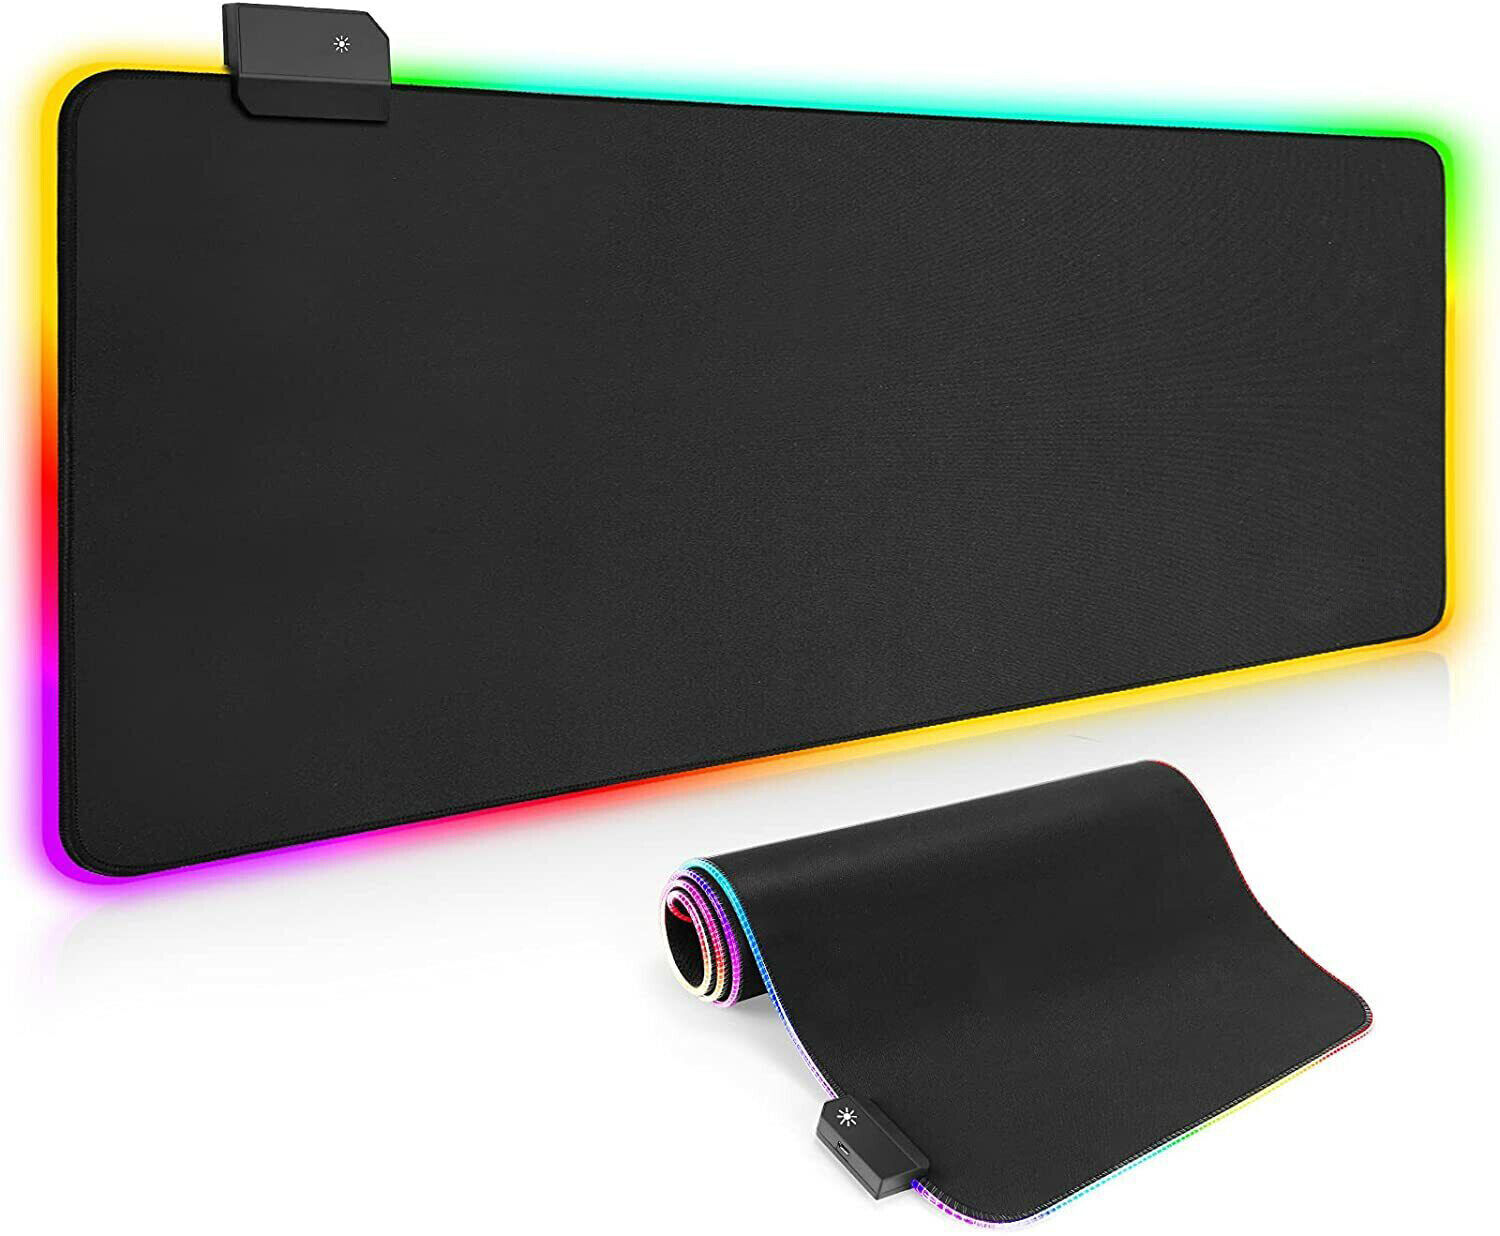 Fit RGB LED Extra Large Soft Gaming Mouse Pad Oversized Glowing 31.5×11.8 inches